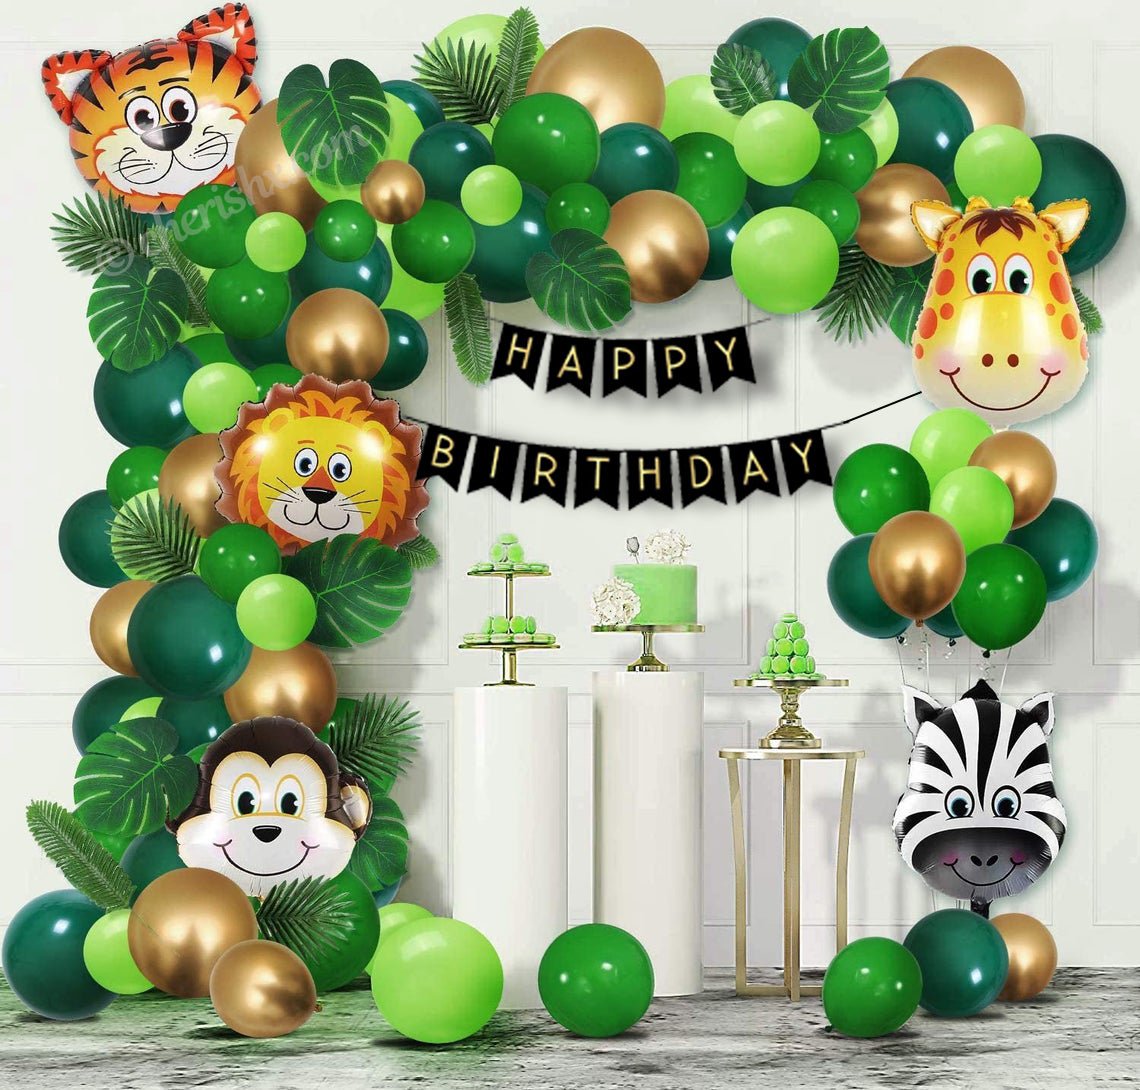 Forest Theme Birthday Party Decorations For Kids - 77 Pcs Combo - Bunting Animal Face Shape Foil, Chrome Balloons - Jungle Theme freeshipping - CherishX Partystore